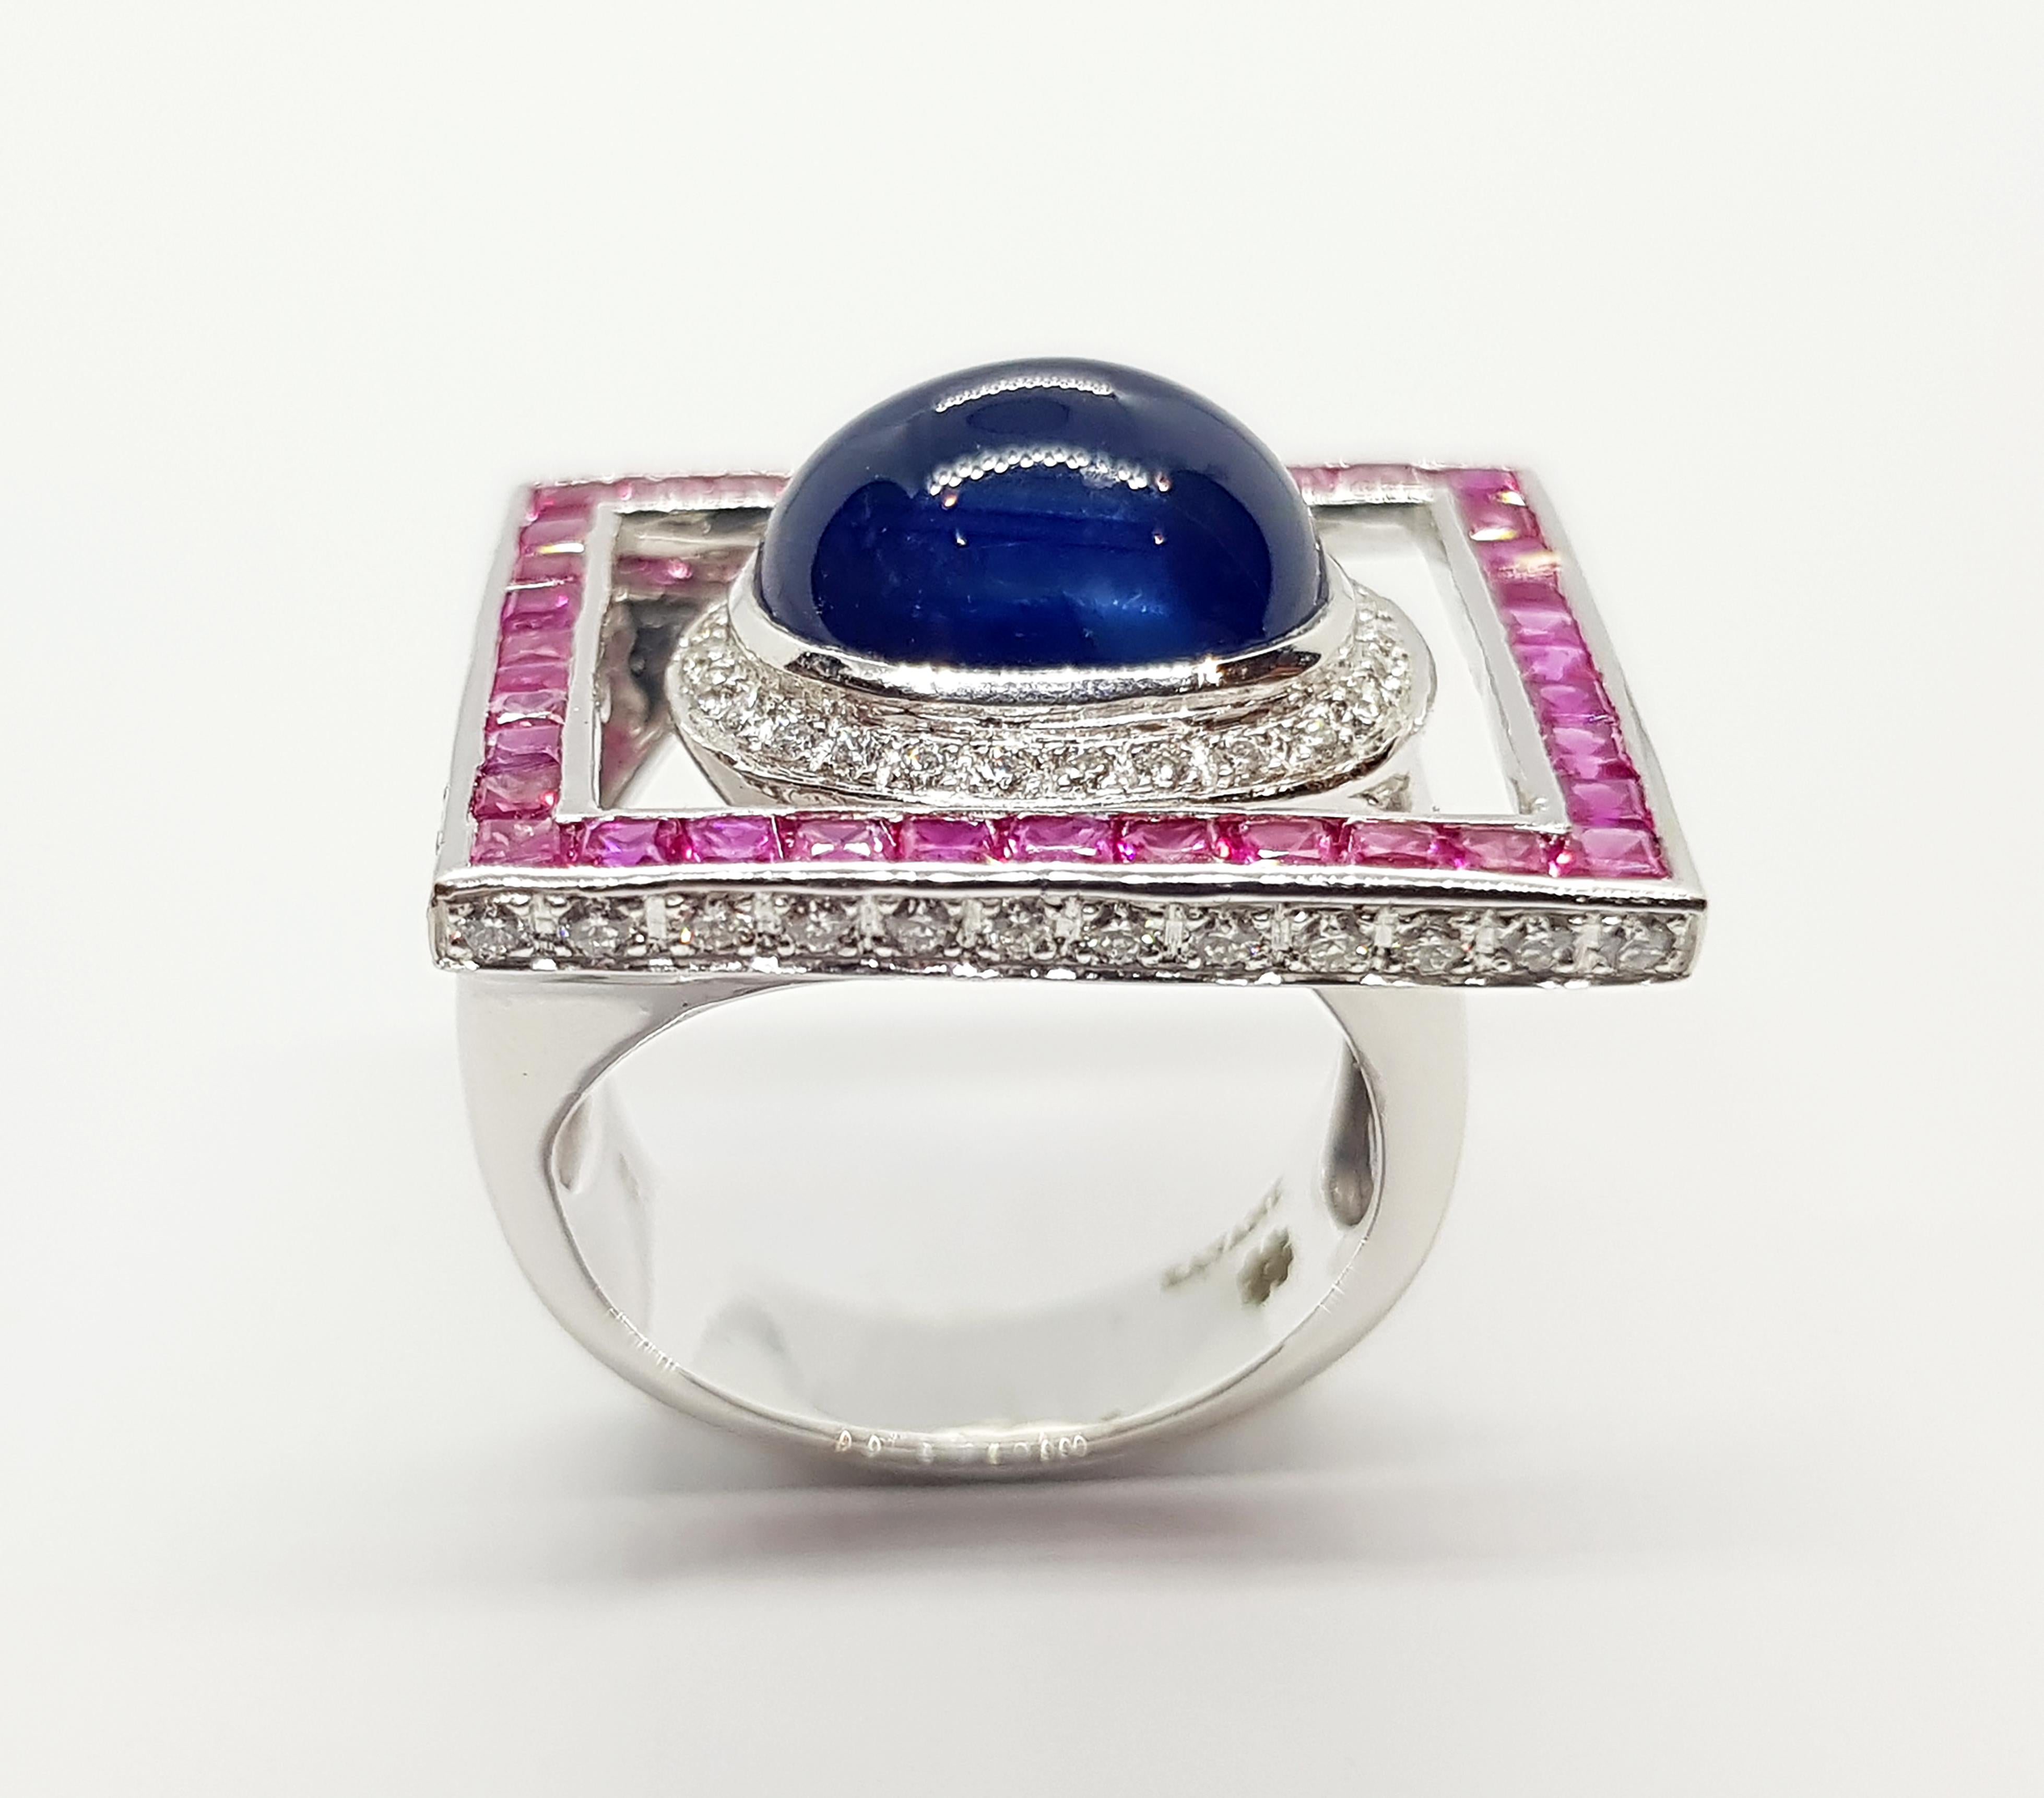 Cabochon Blue Sapphire 7.14 carats with Ruby 2.20 carats and Diamond 0.69 carat Ring set in 18 Karat White Gold Settings

Width:  2.4 cm 
Length: 2.0 cm
Ring Size: 53
Total Weight: 14.65 grams

